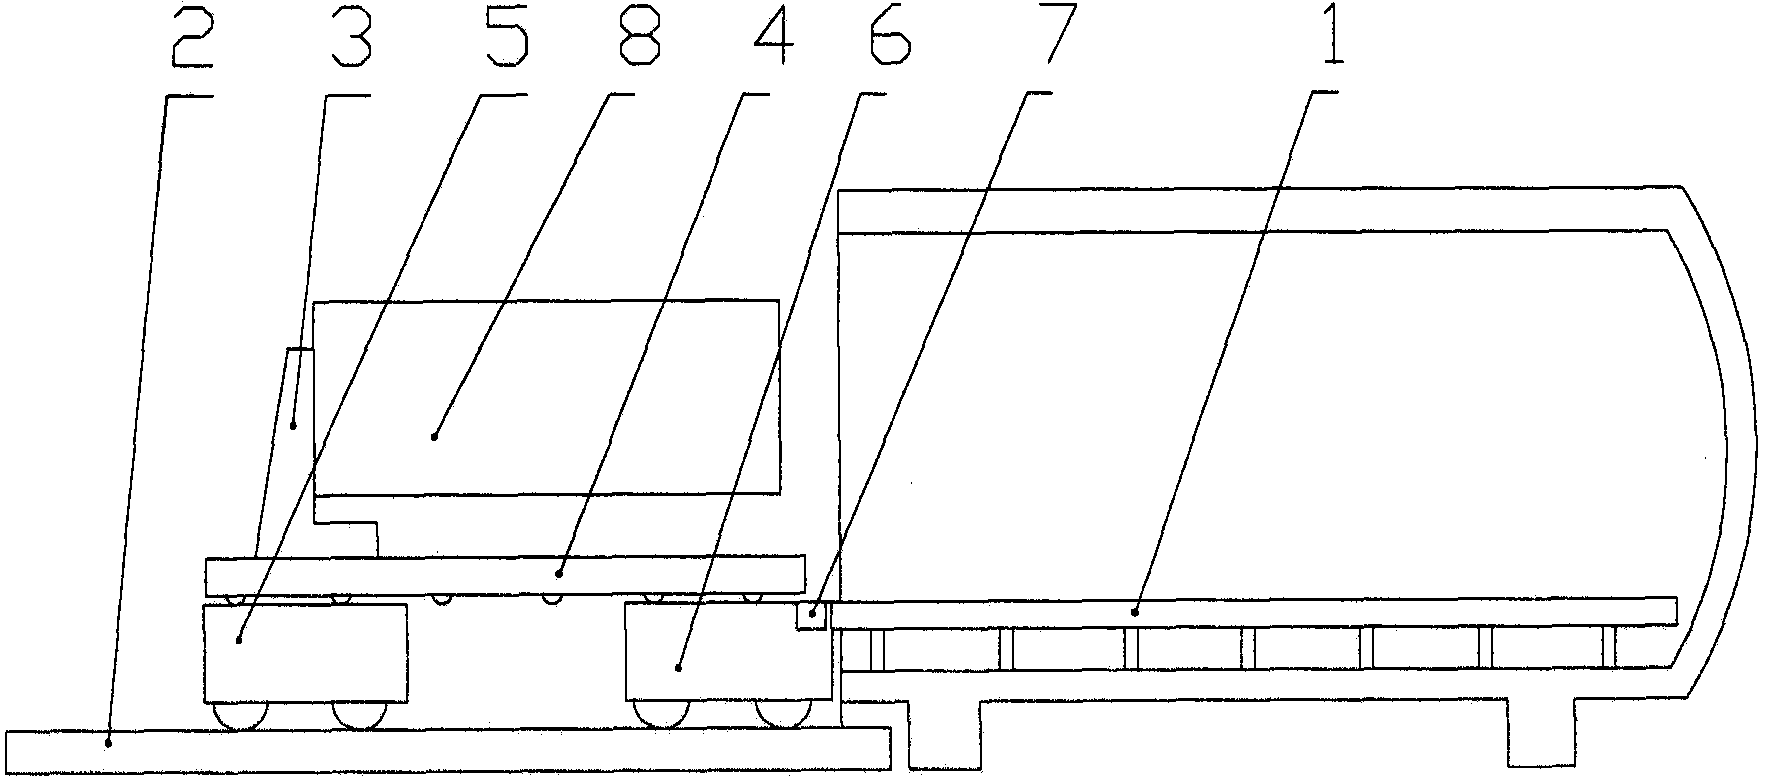 A device and method for transfer, docking and transfer positioning of a spacecraft inside and outside a space environment container cabin